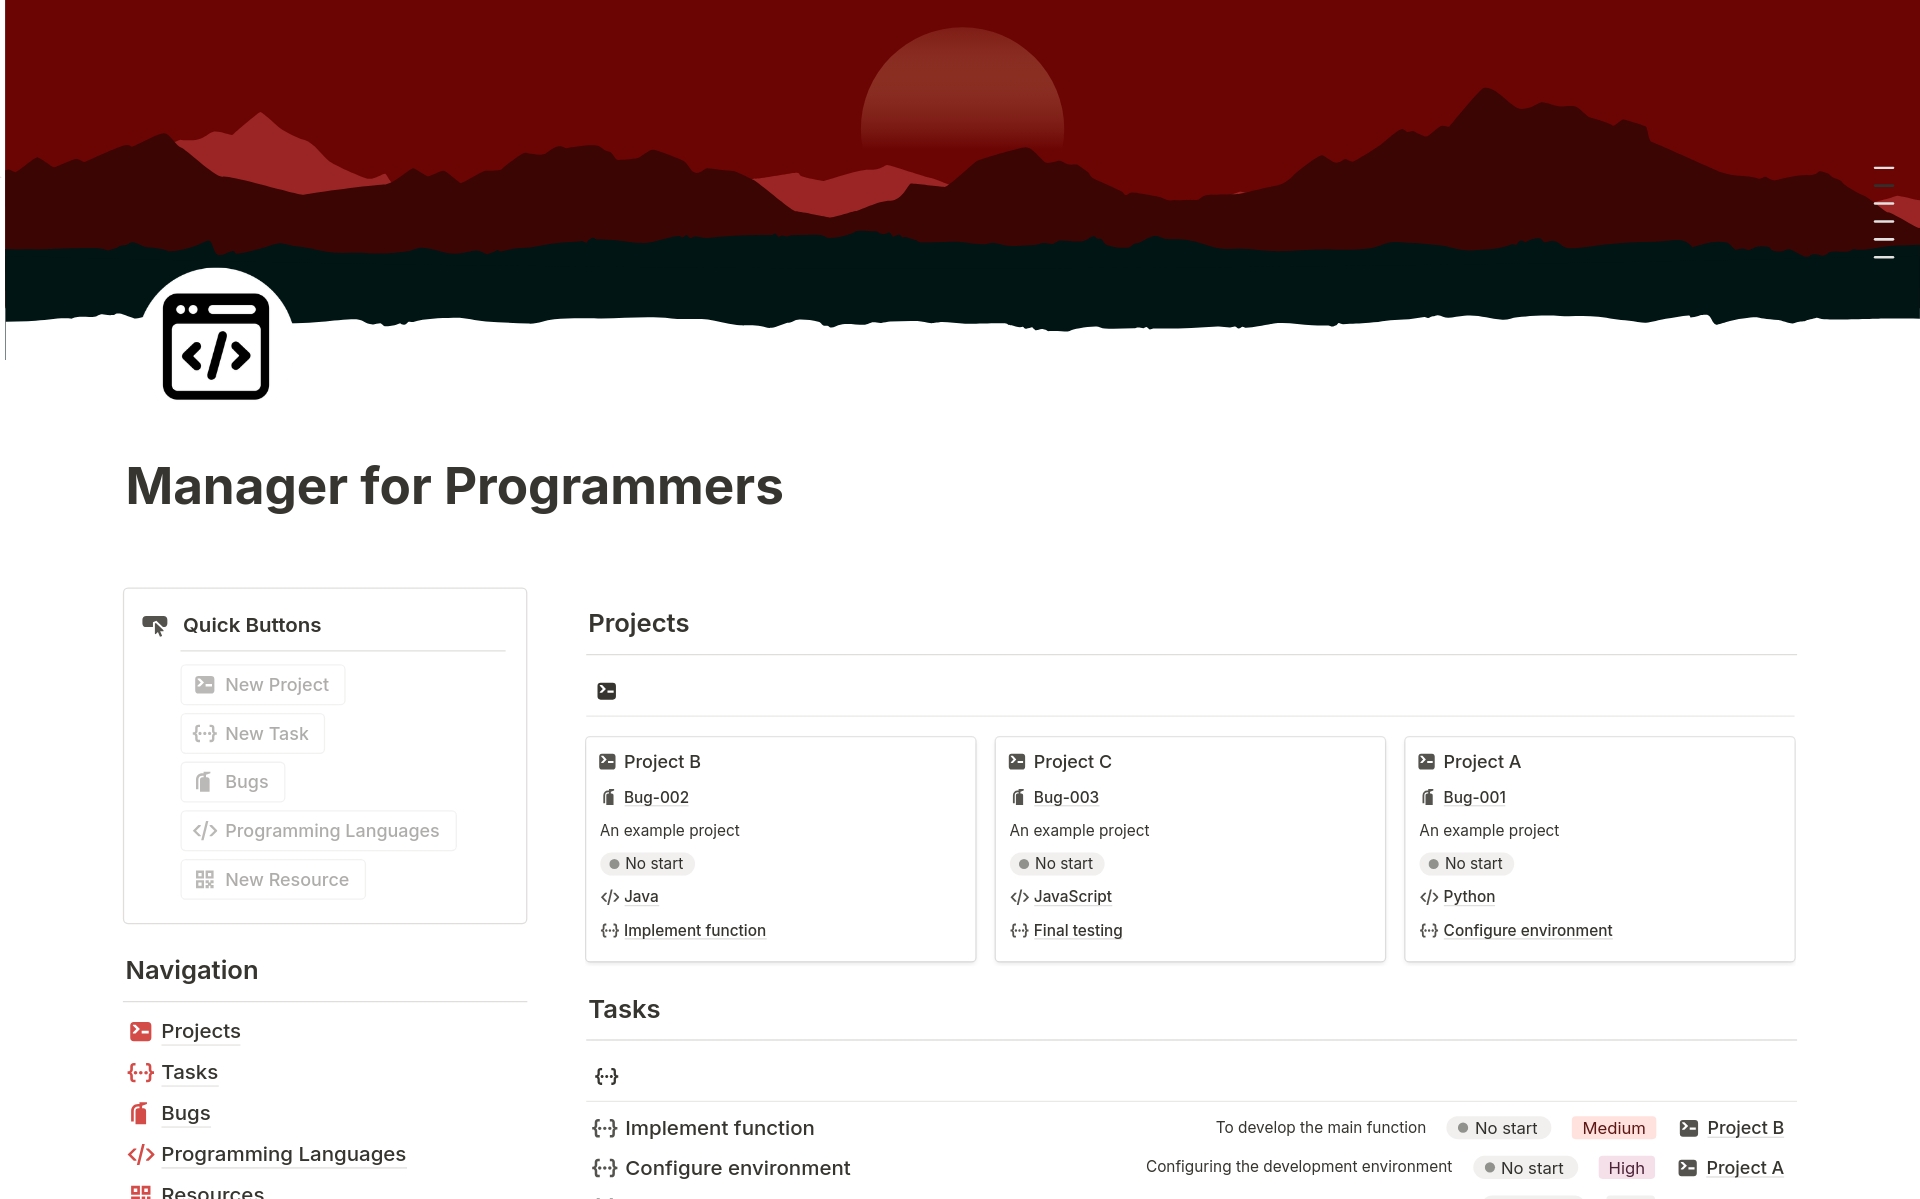 Organize your programming projects with this specialized template. Keep detailed track of your tasks, codes, and progress.